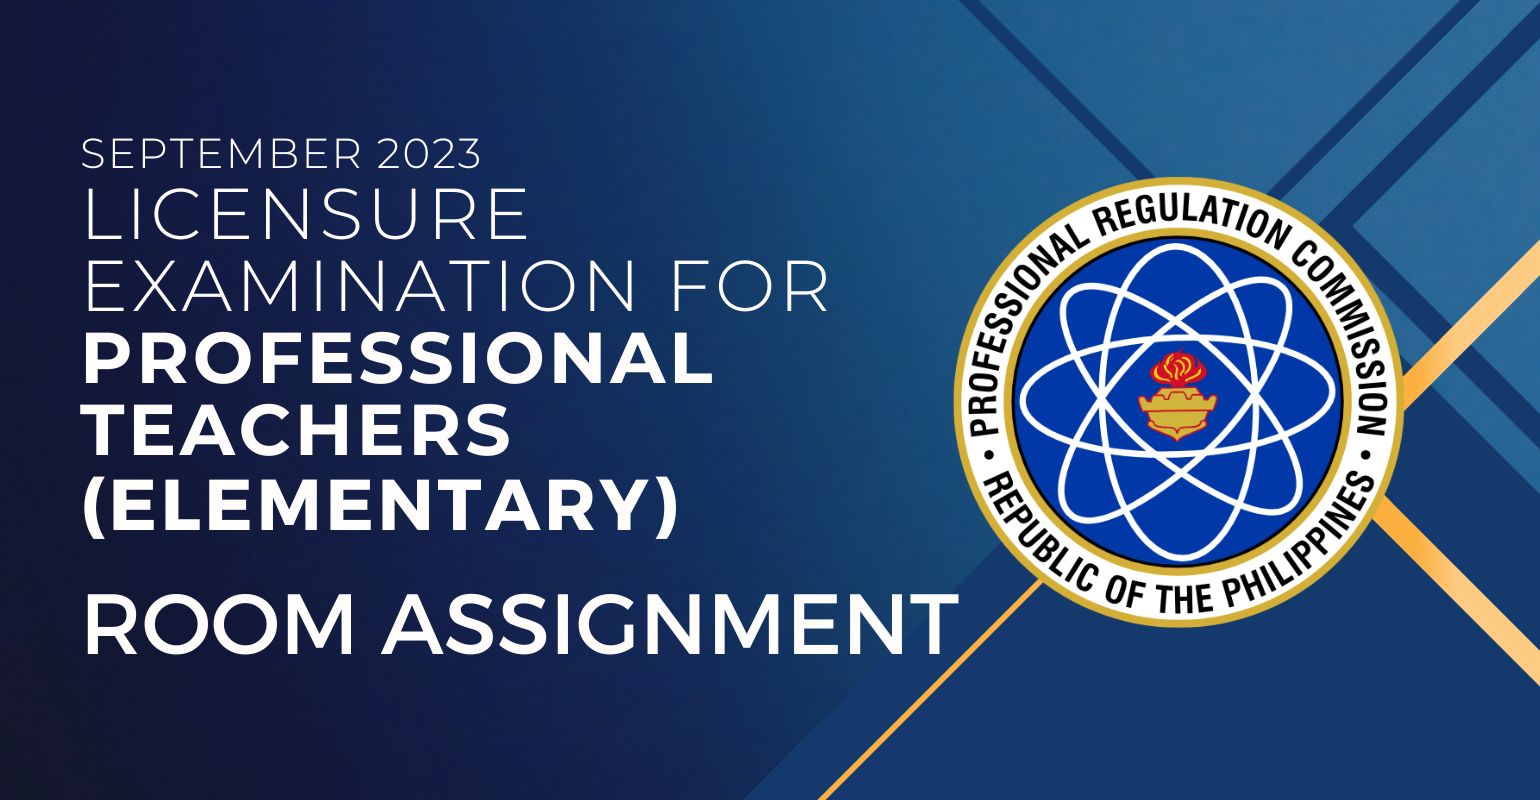 Room Assignment – September 2023 Licensure Examination for Professional Teachers (ELEMENTARY)